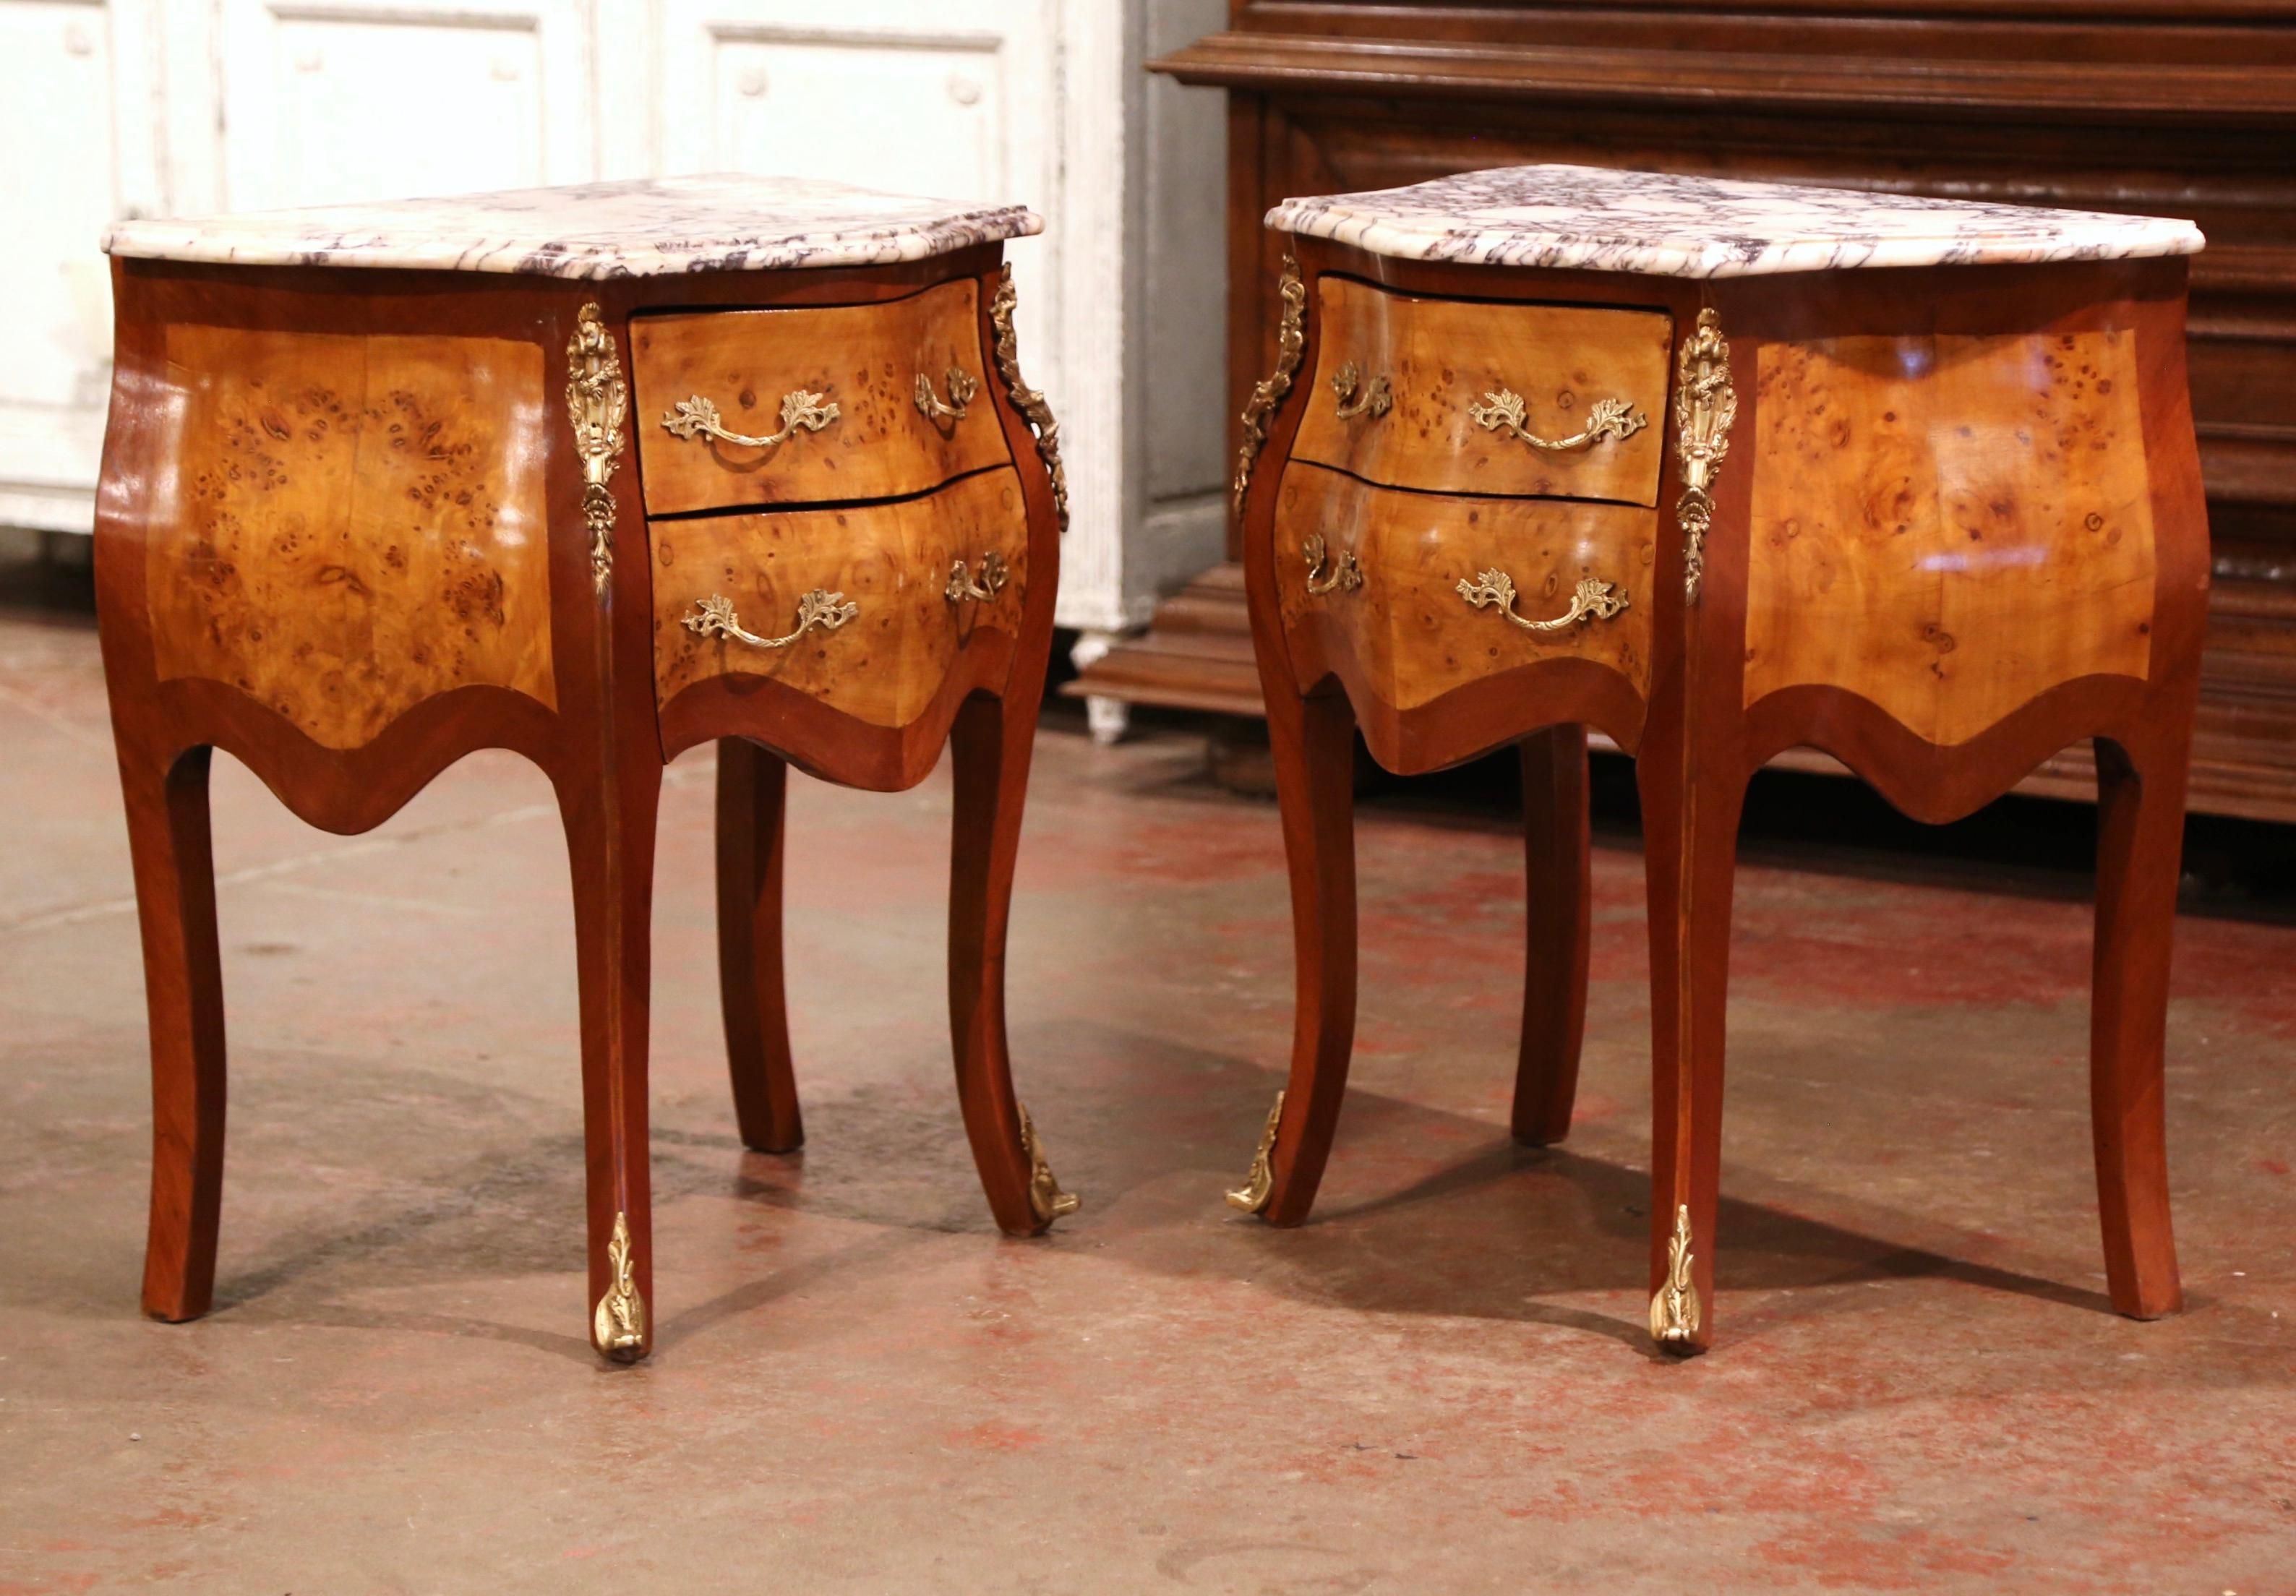 These elegant bedside tables were created in France, circa 1980. Bombe in shape on all three sides, the fruitwood petite chests stand on cabriole legs ending with decorative bronze sabot feet; both sides with serpentine shape have inlaid veneer